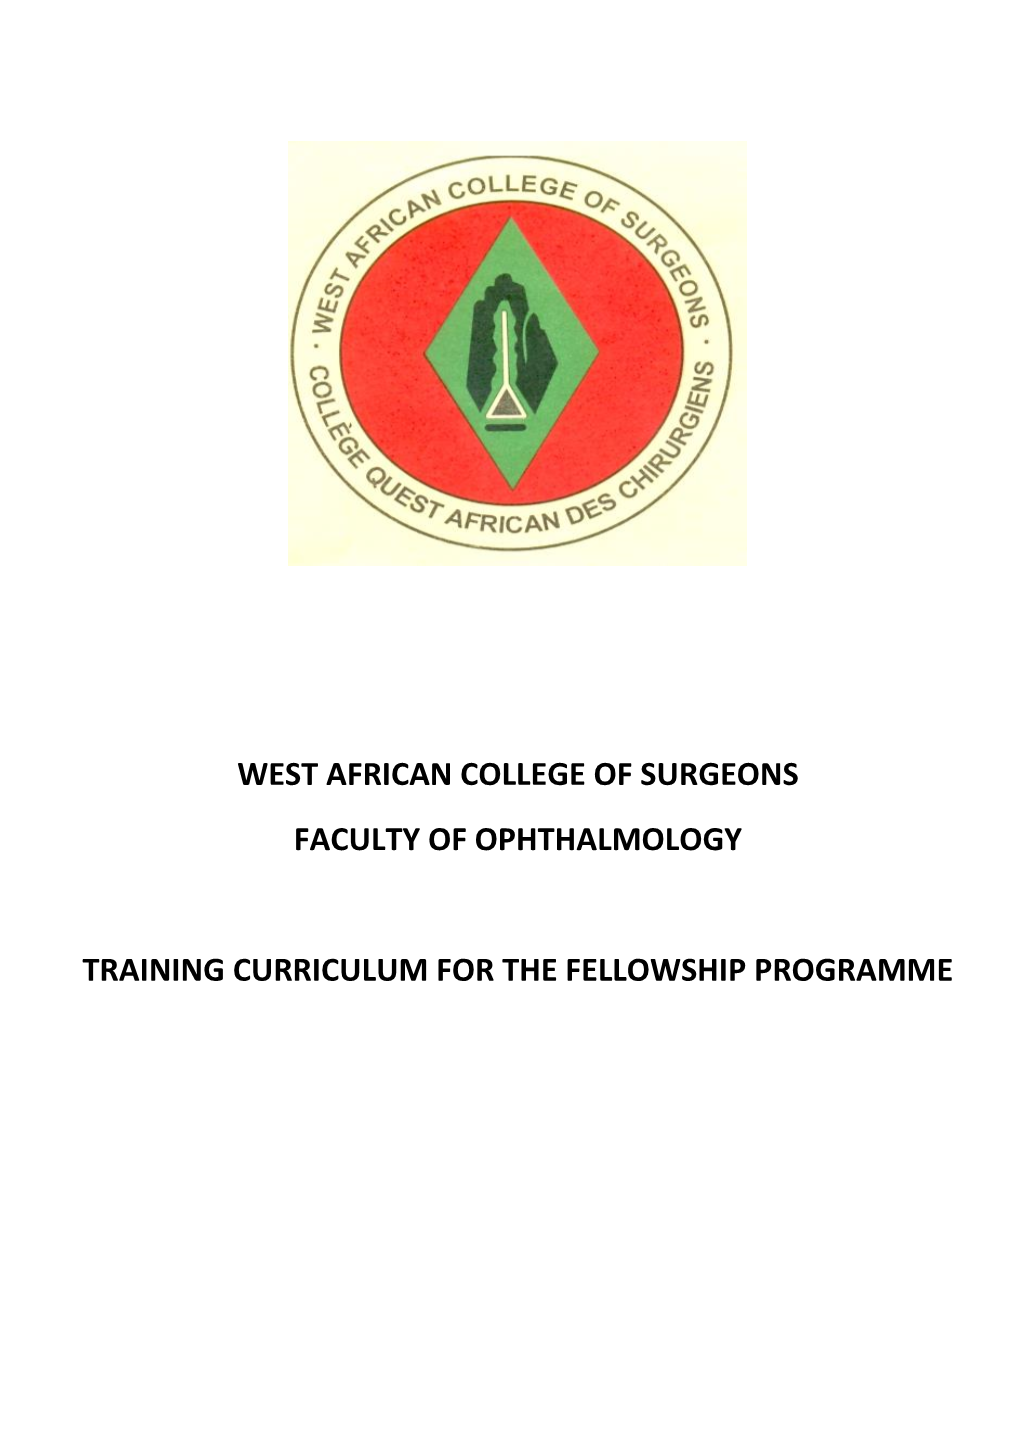 West African College of Surgeons Faculty of Ophthalmology Training